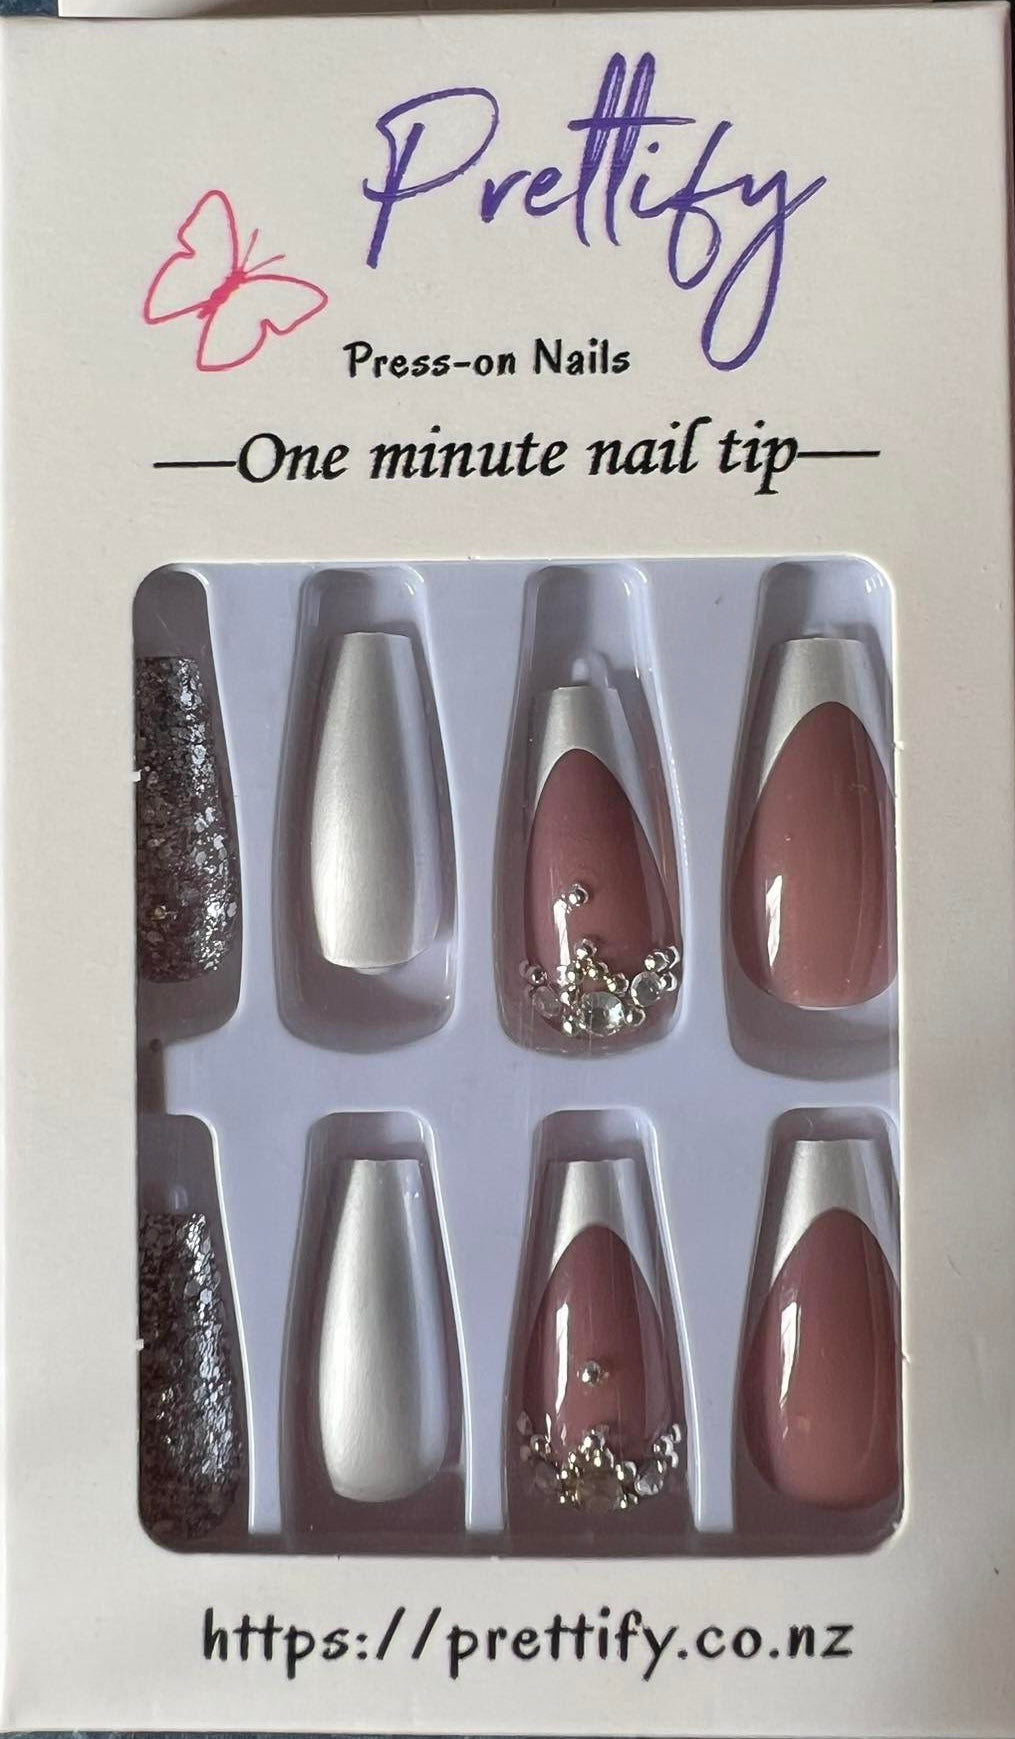 Medium Length Coffin Press on Nails. Pearl White, White Tips, Silver Glitter & Jewels. Durable Acrylic Press on Nails. Easy and quick to apply. Great for those special occasions, parties or add an edge to any outfit. Gorgeous, flattering and you can re-use them again and again.